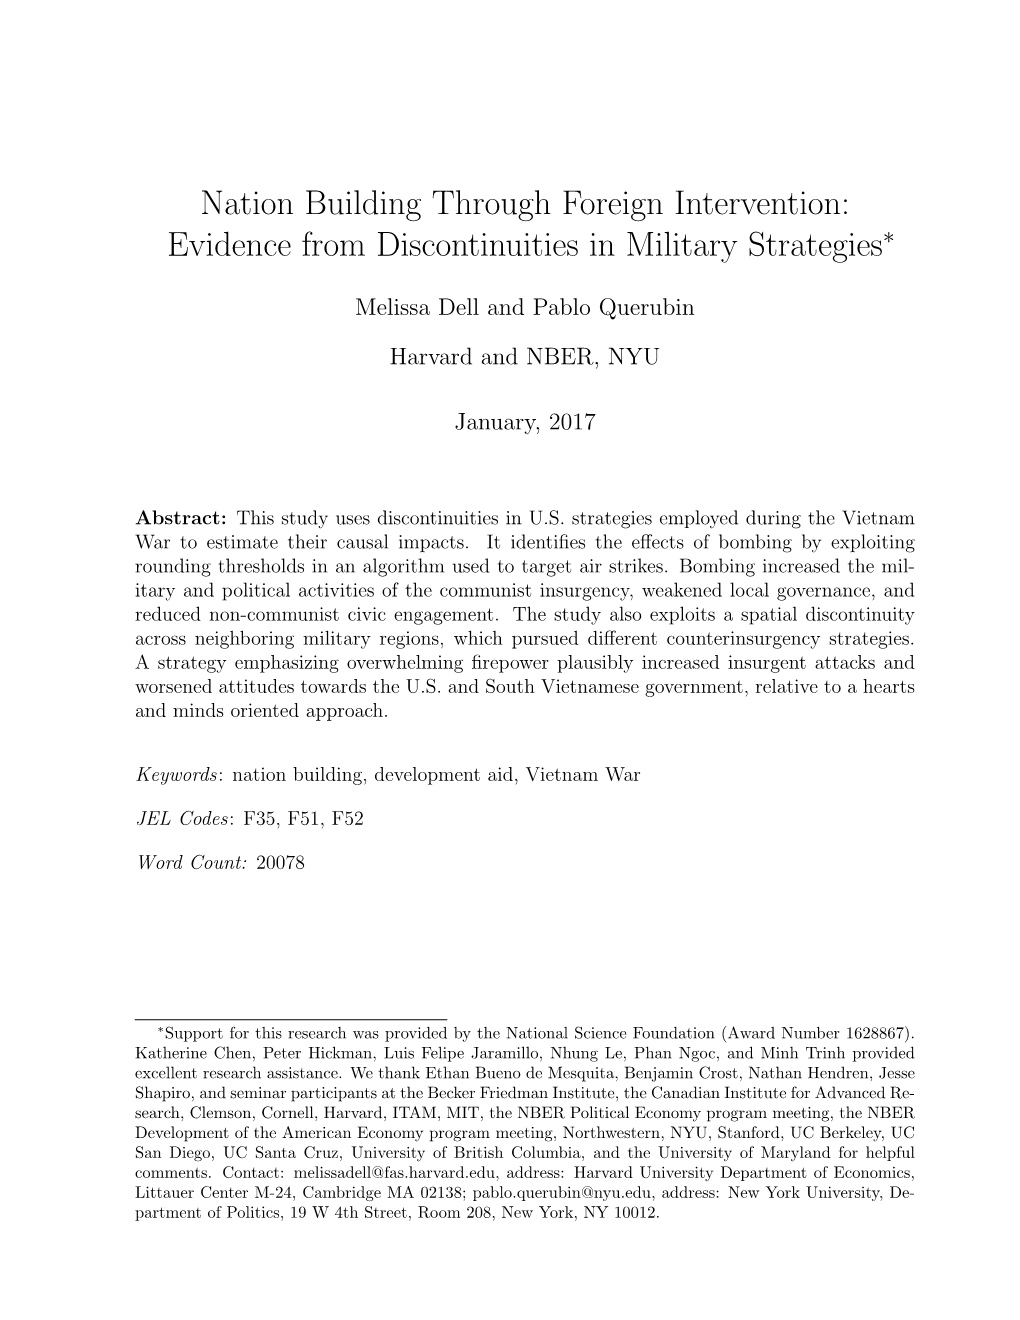 Nation Building Through Foreign Intervention: Evidence from Discontinuities in Military Strategies∗